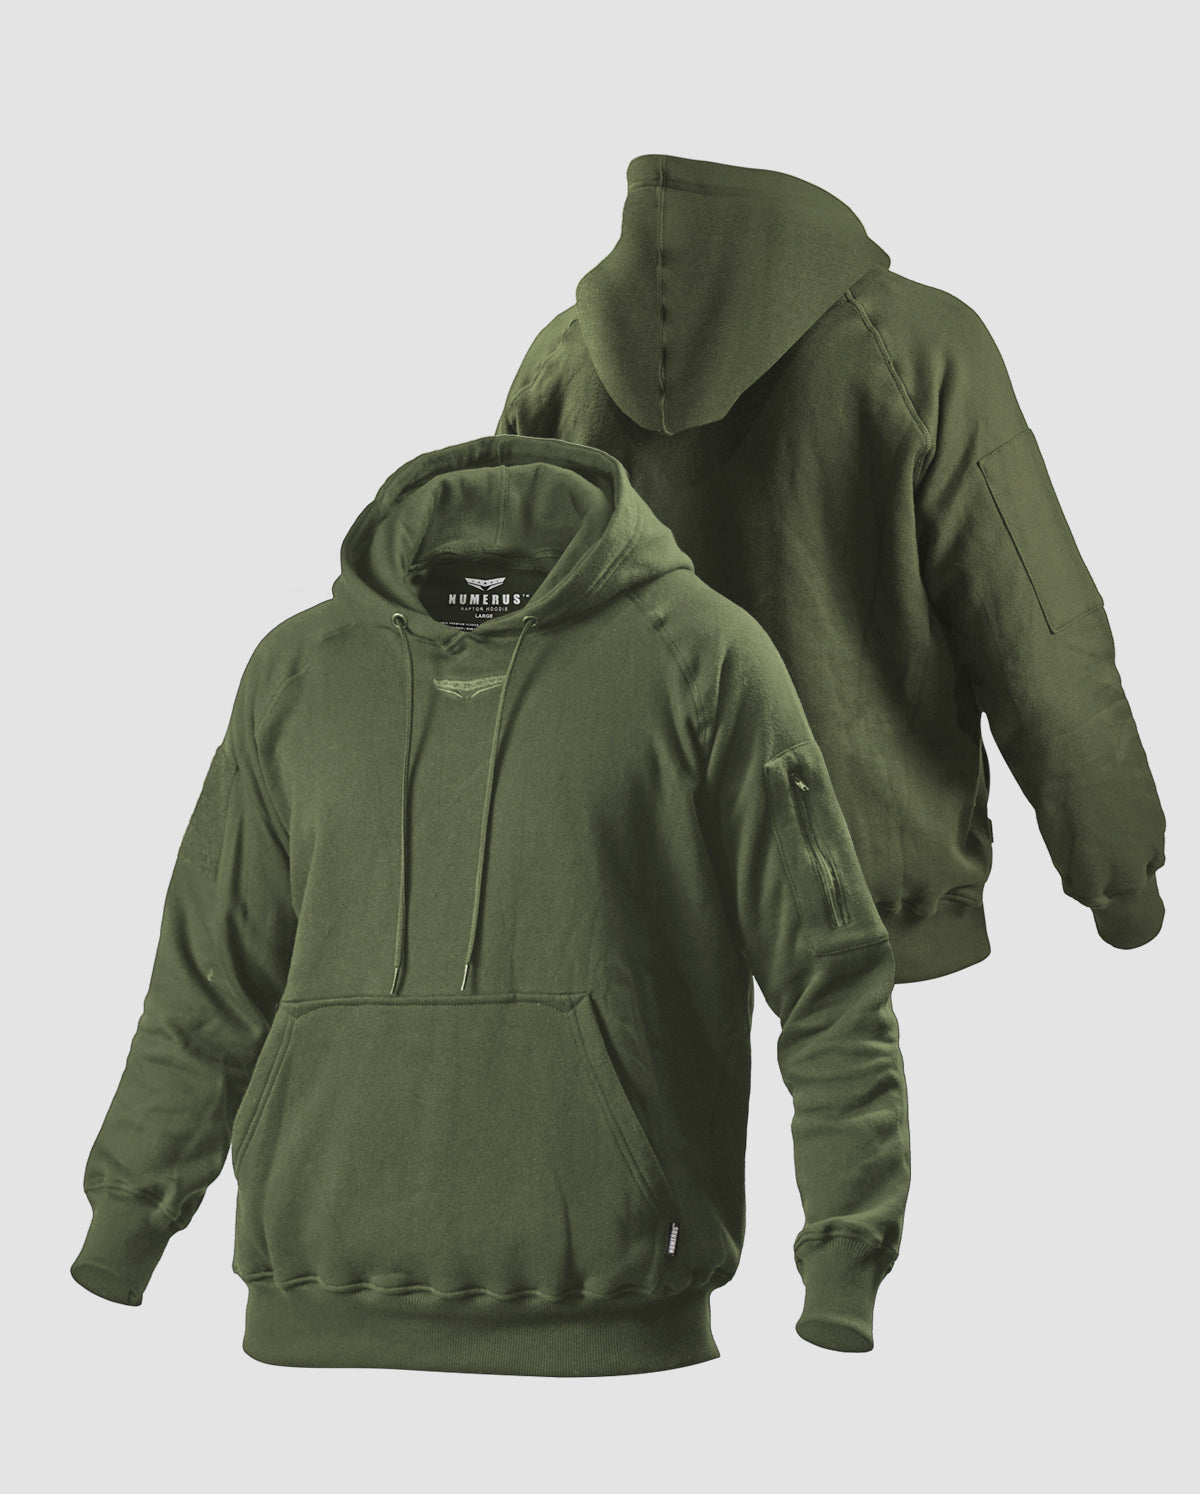 Classic pullover Raptor hoodie - Green army – Numerus